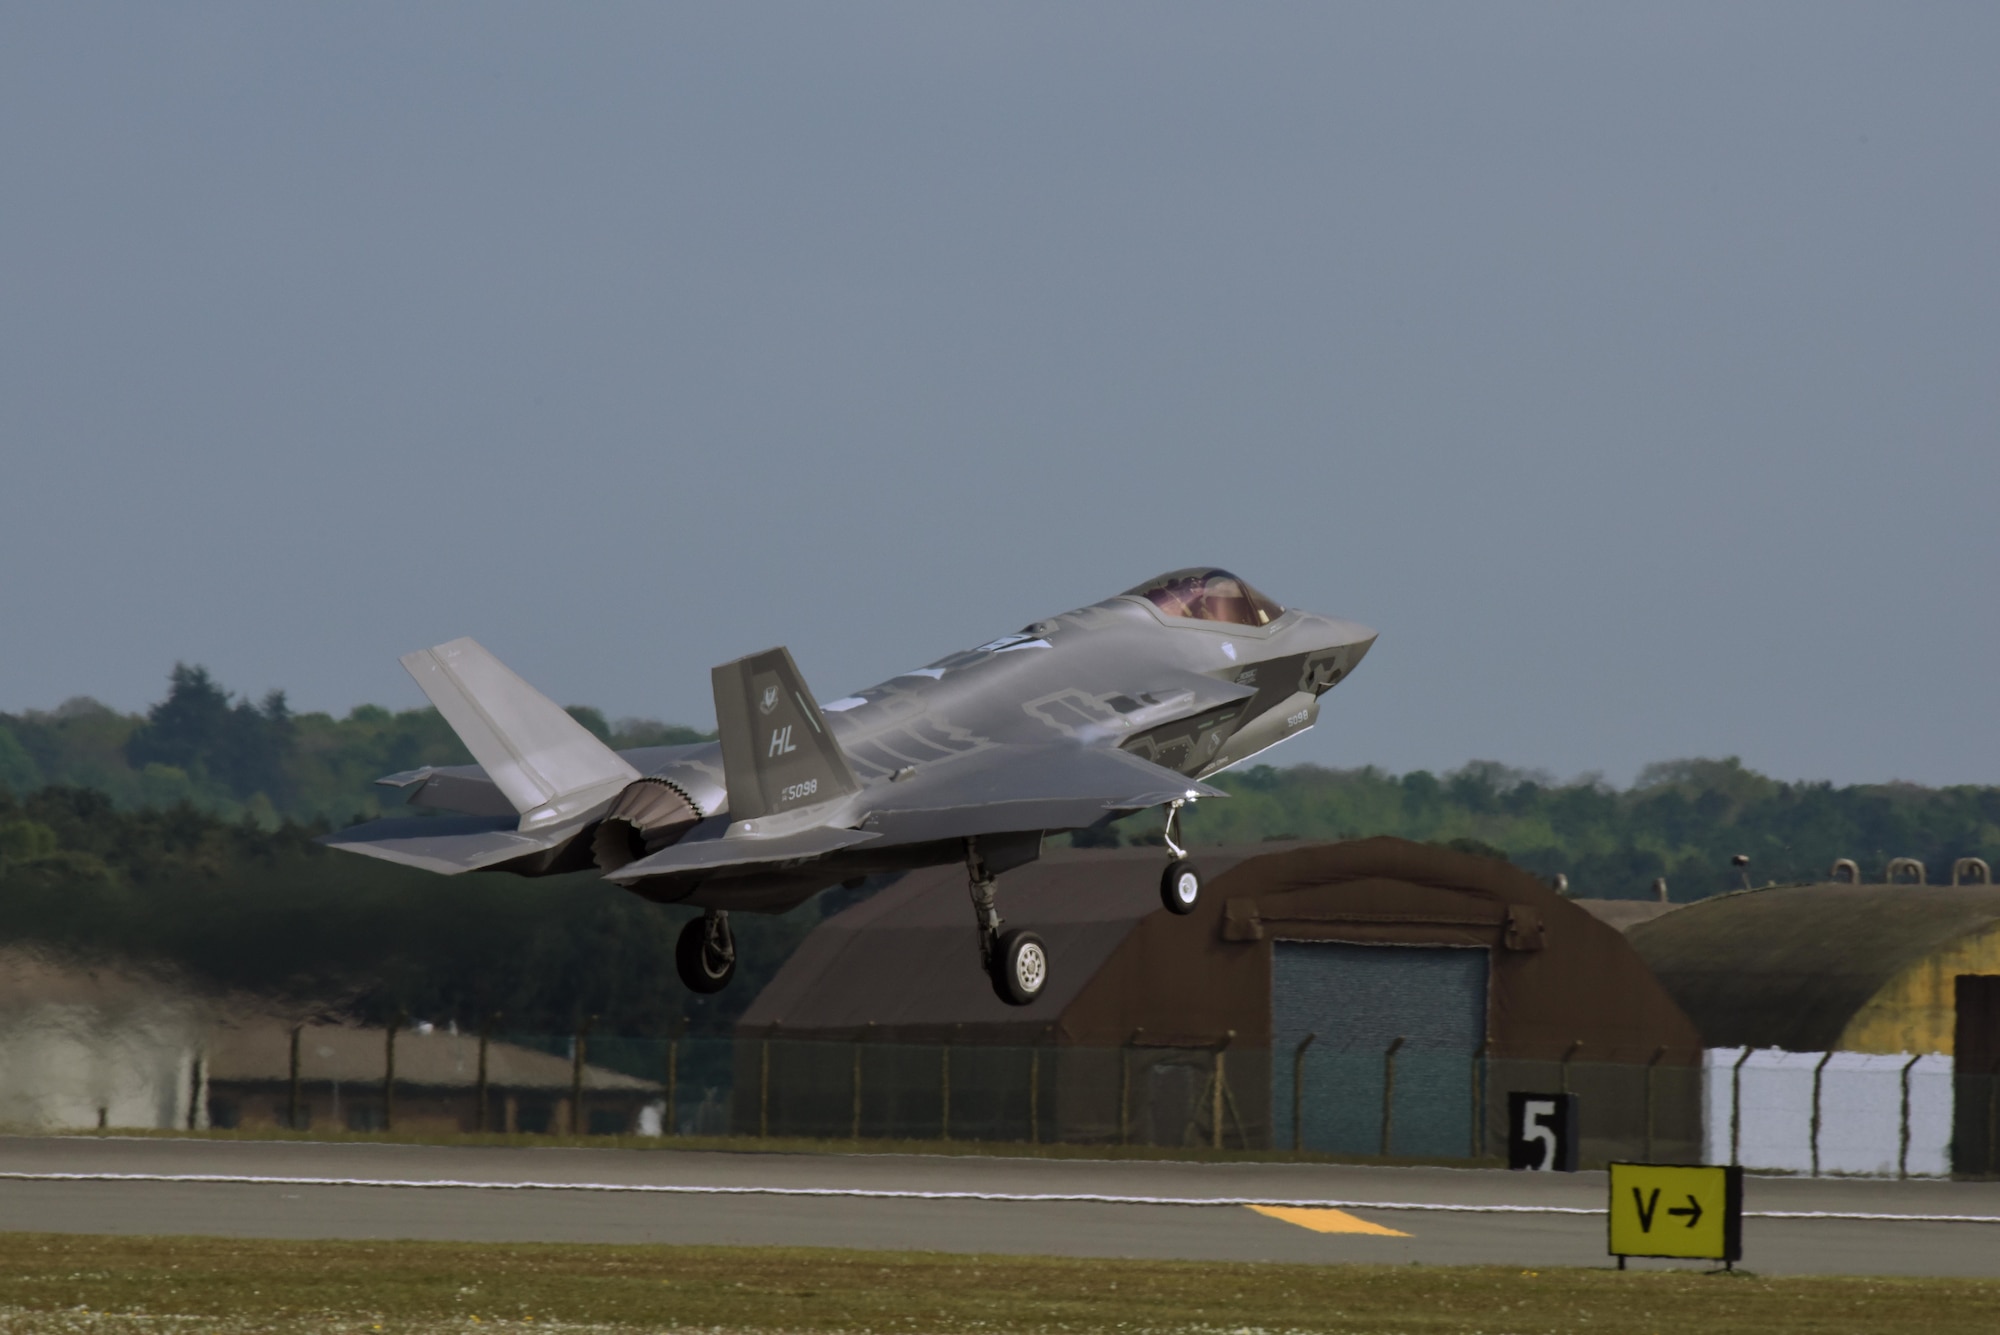 An F-35A Lightning II, assigned to the 34th Fighter Squadron at Hill Air Force Base, Utah, takes off from Royal Air Force Lakenheath, England, May 7. Eight F-35A aircraft, approximately 250 Airmen, and associated equipment had been operating out of Lakenheath during a training deployment to conduct air training with other Europe-based aircraft. (U.S. Air Force photo/Airman 1st Class John A. Crawford)